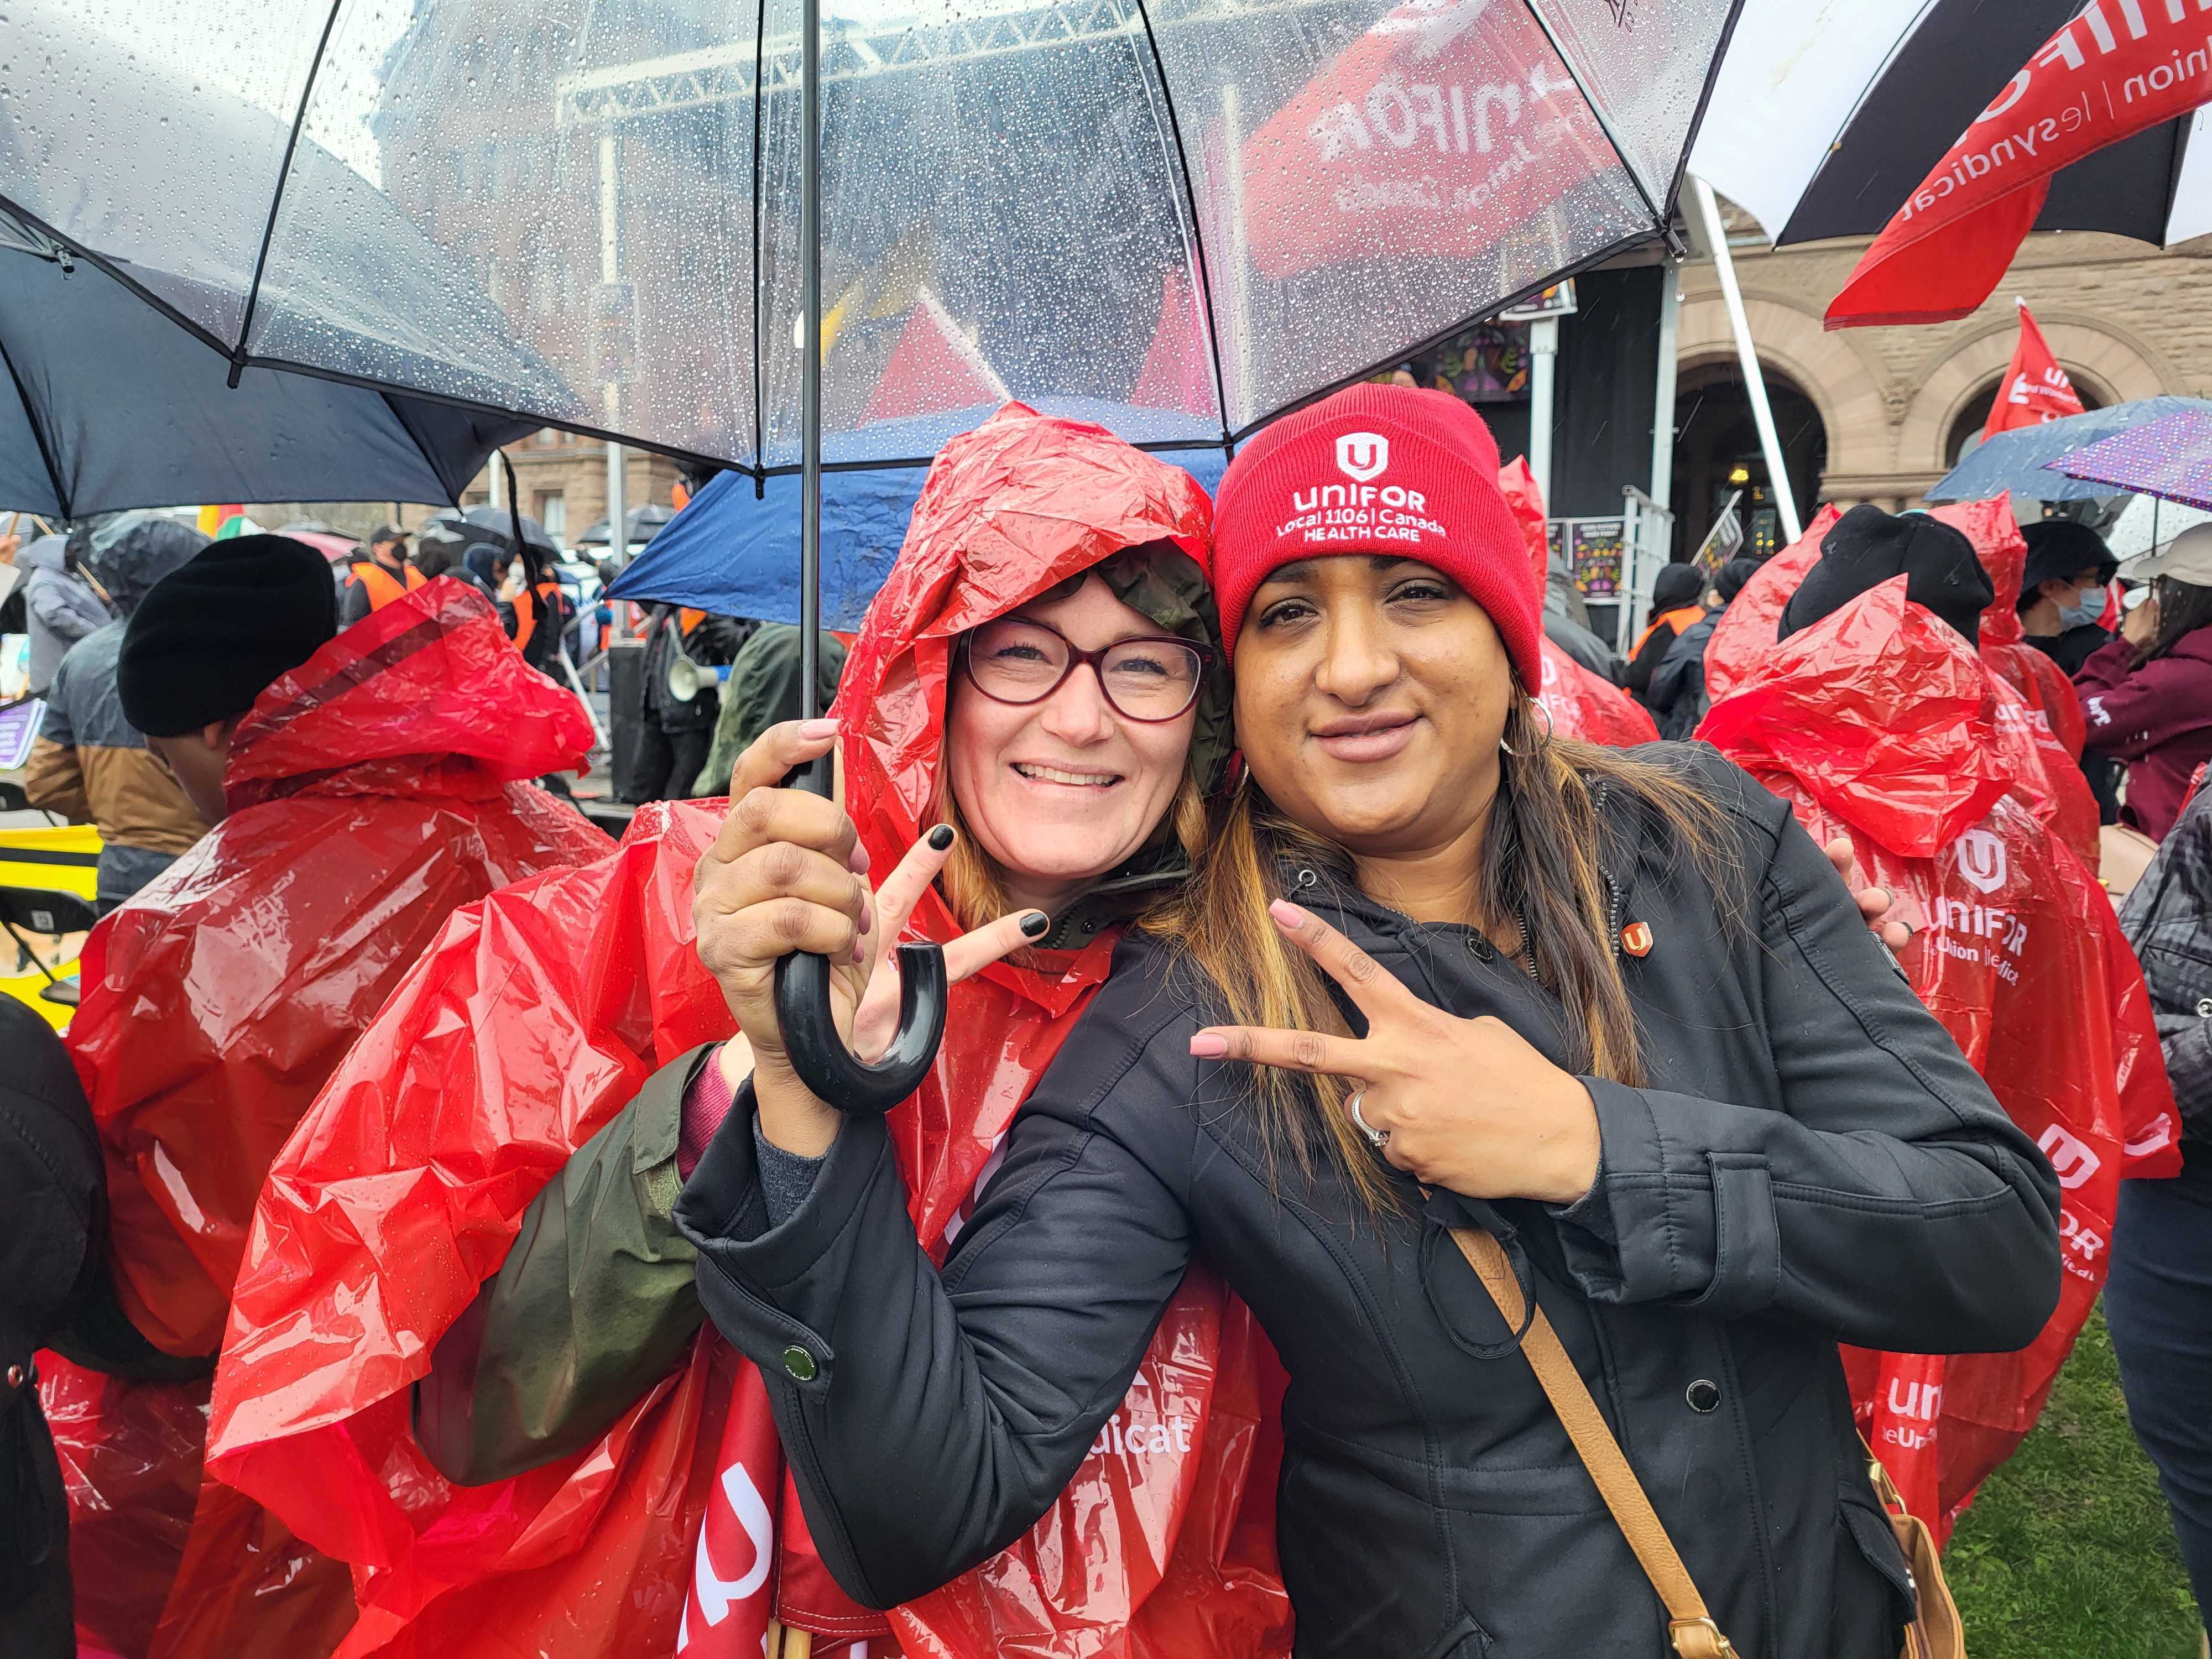 Emily Coulter (right) poses with Unifor member Sarah Kai Antanaitis at the May Day rally in Toronto.